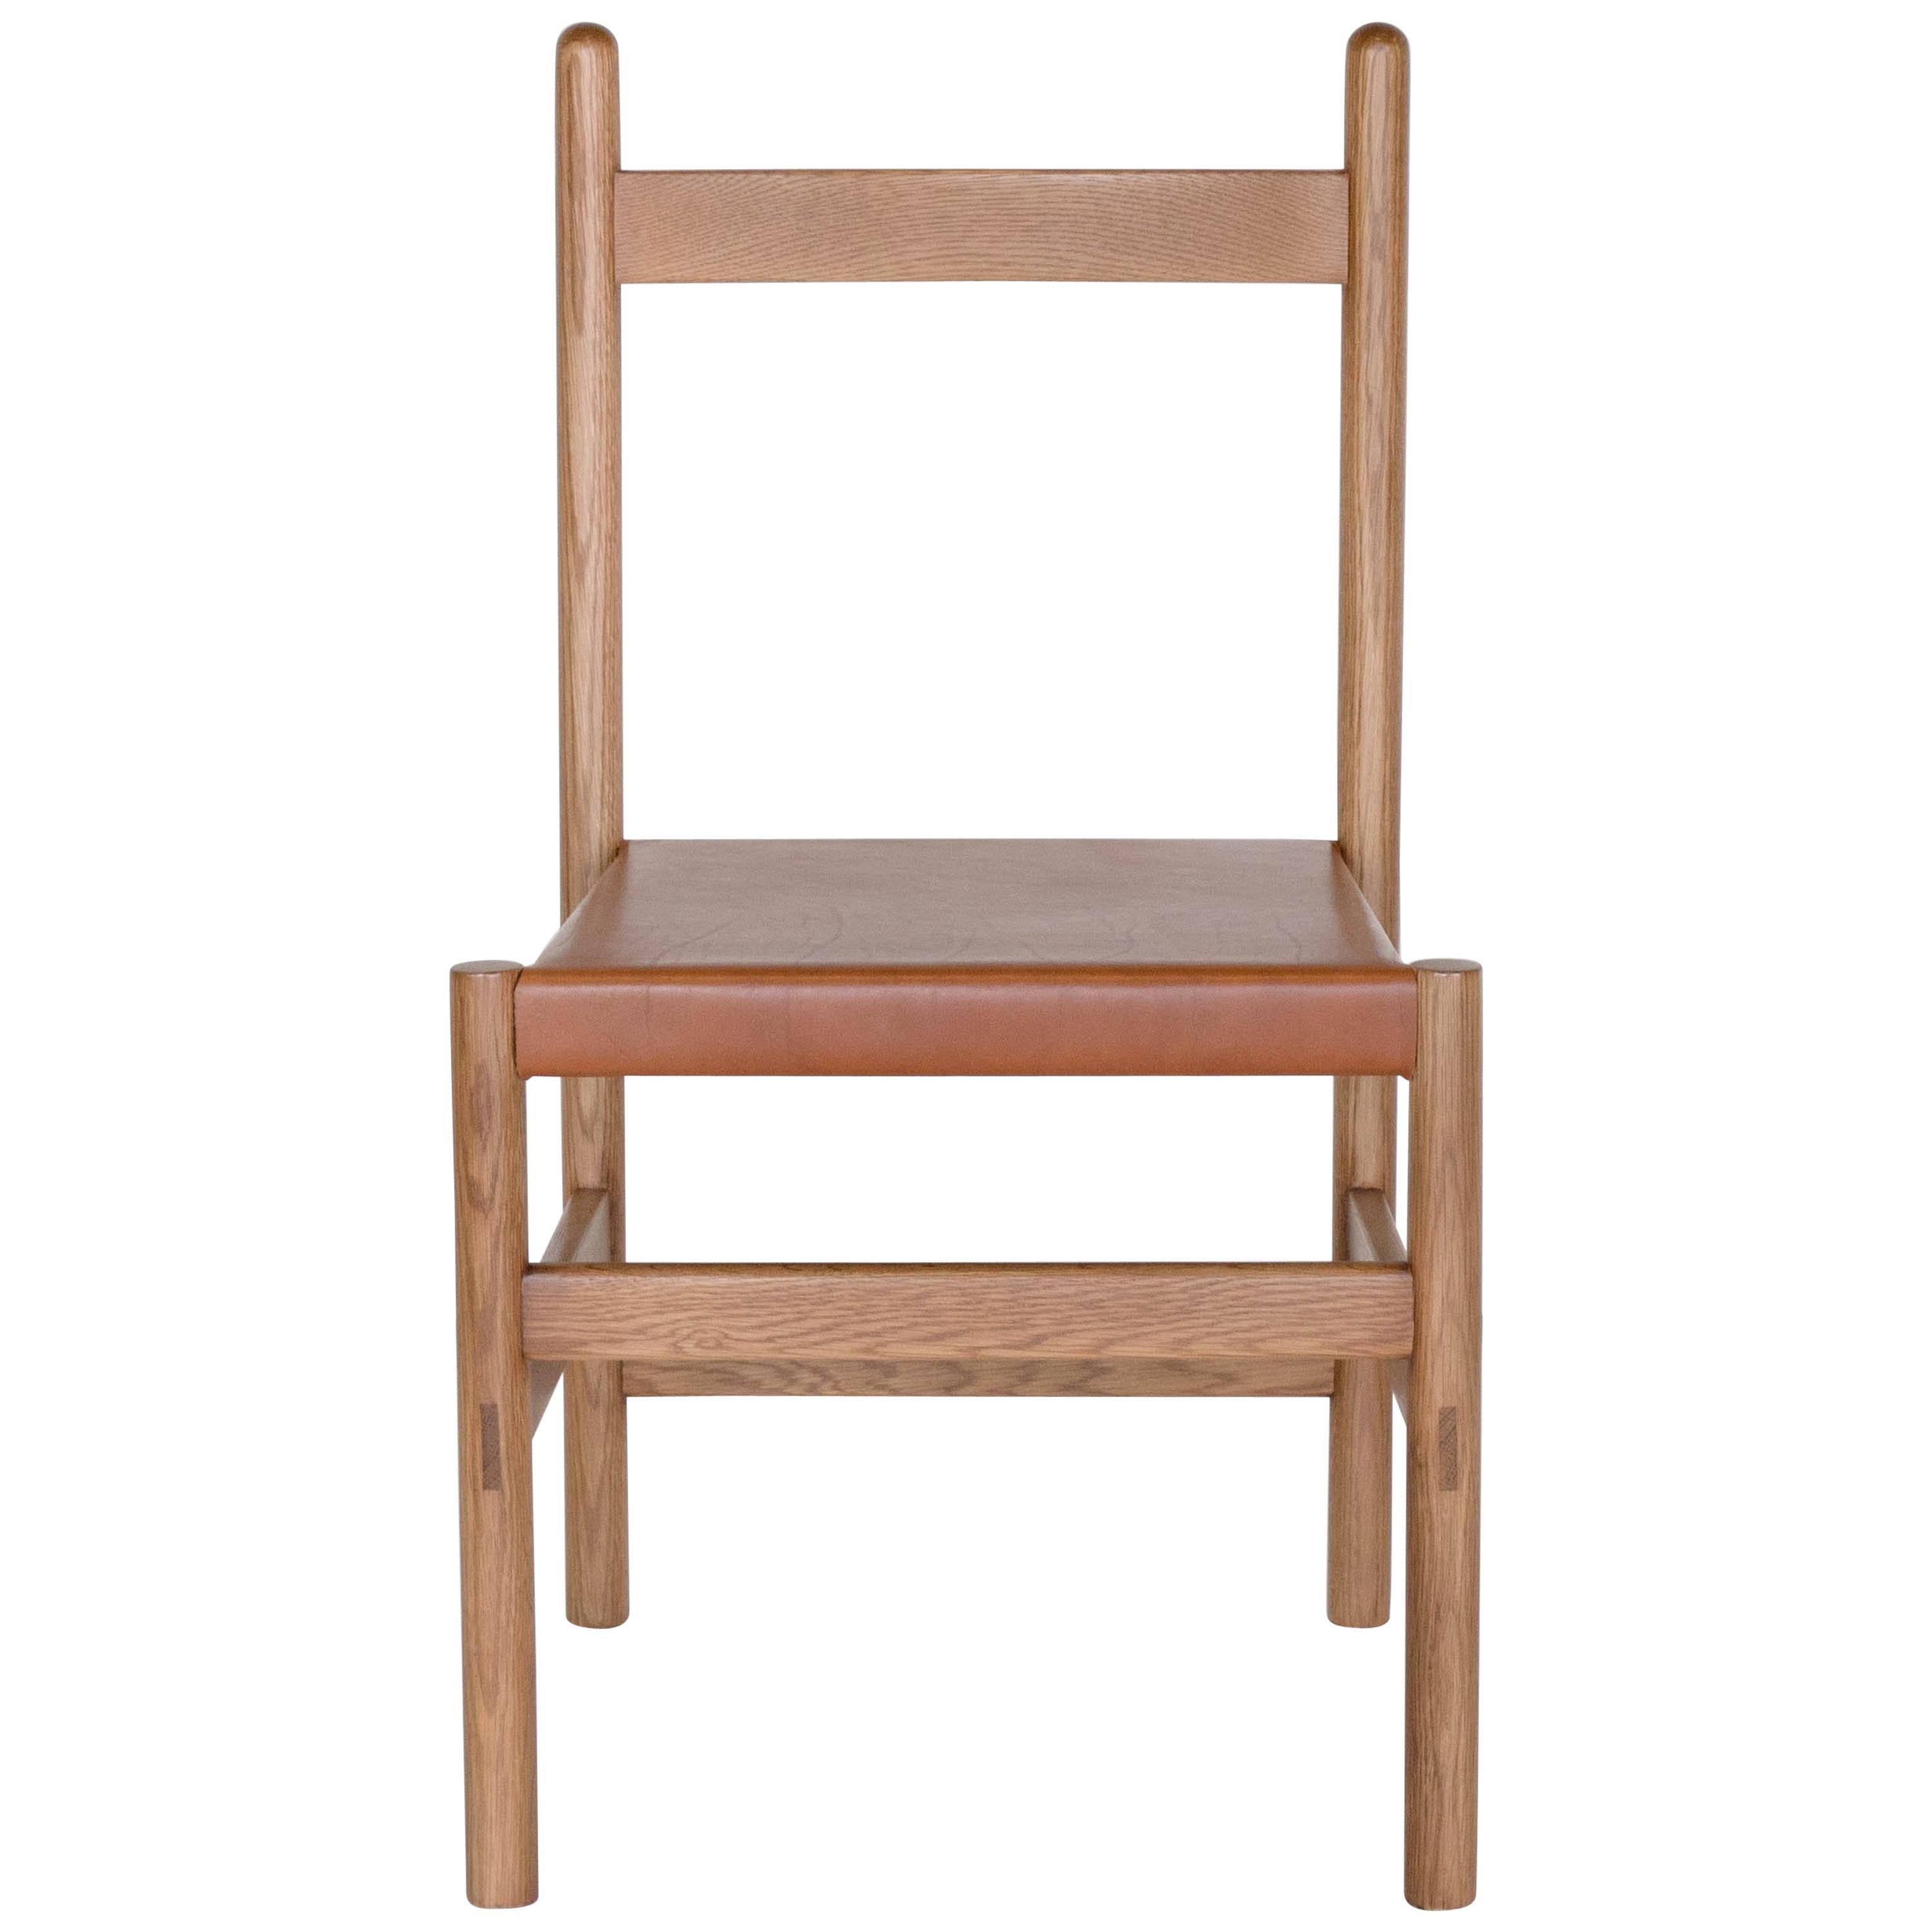 Juniper Chair by Sun at Six, Sienna, Minimalist Chair in Wood and Leather 